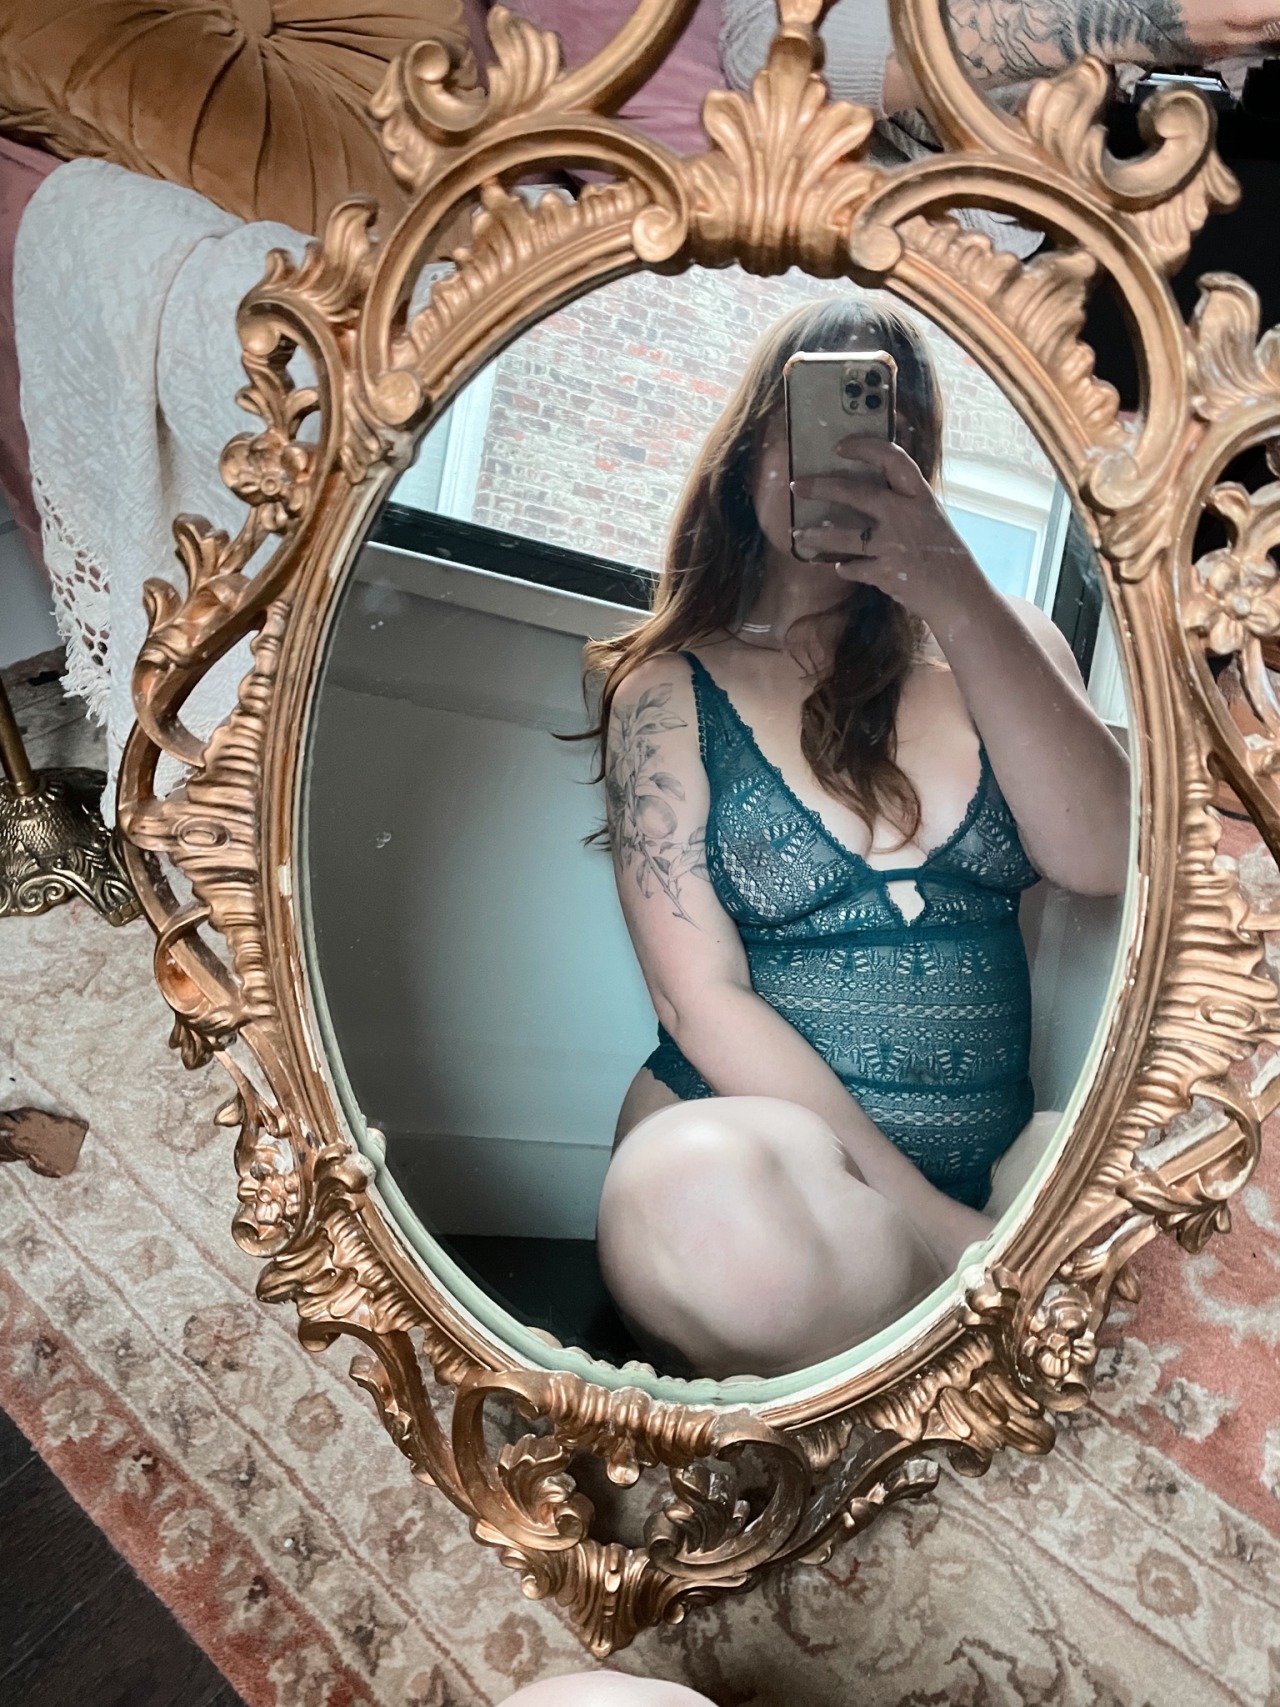 erotic-nonfiction:Gilded mirrors make selfies feel special